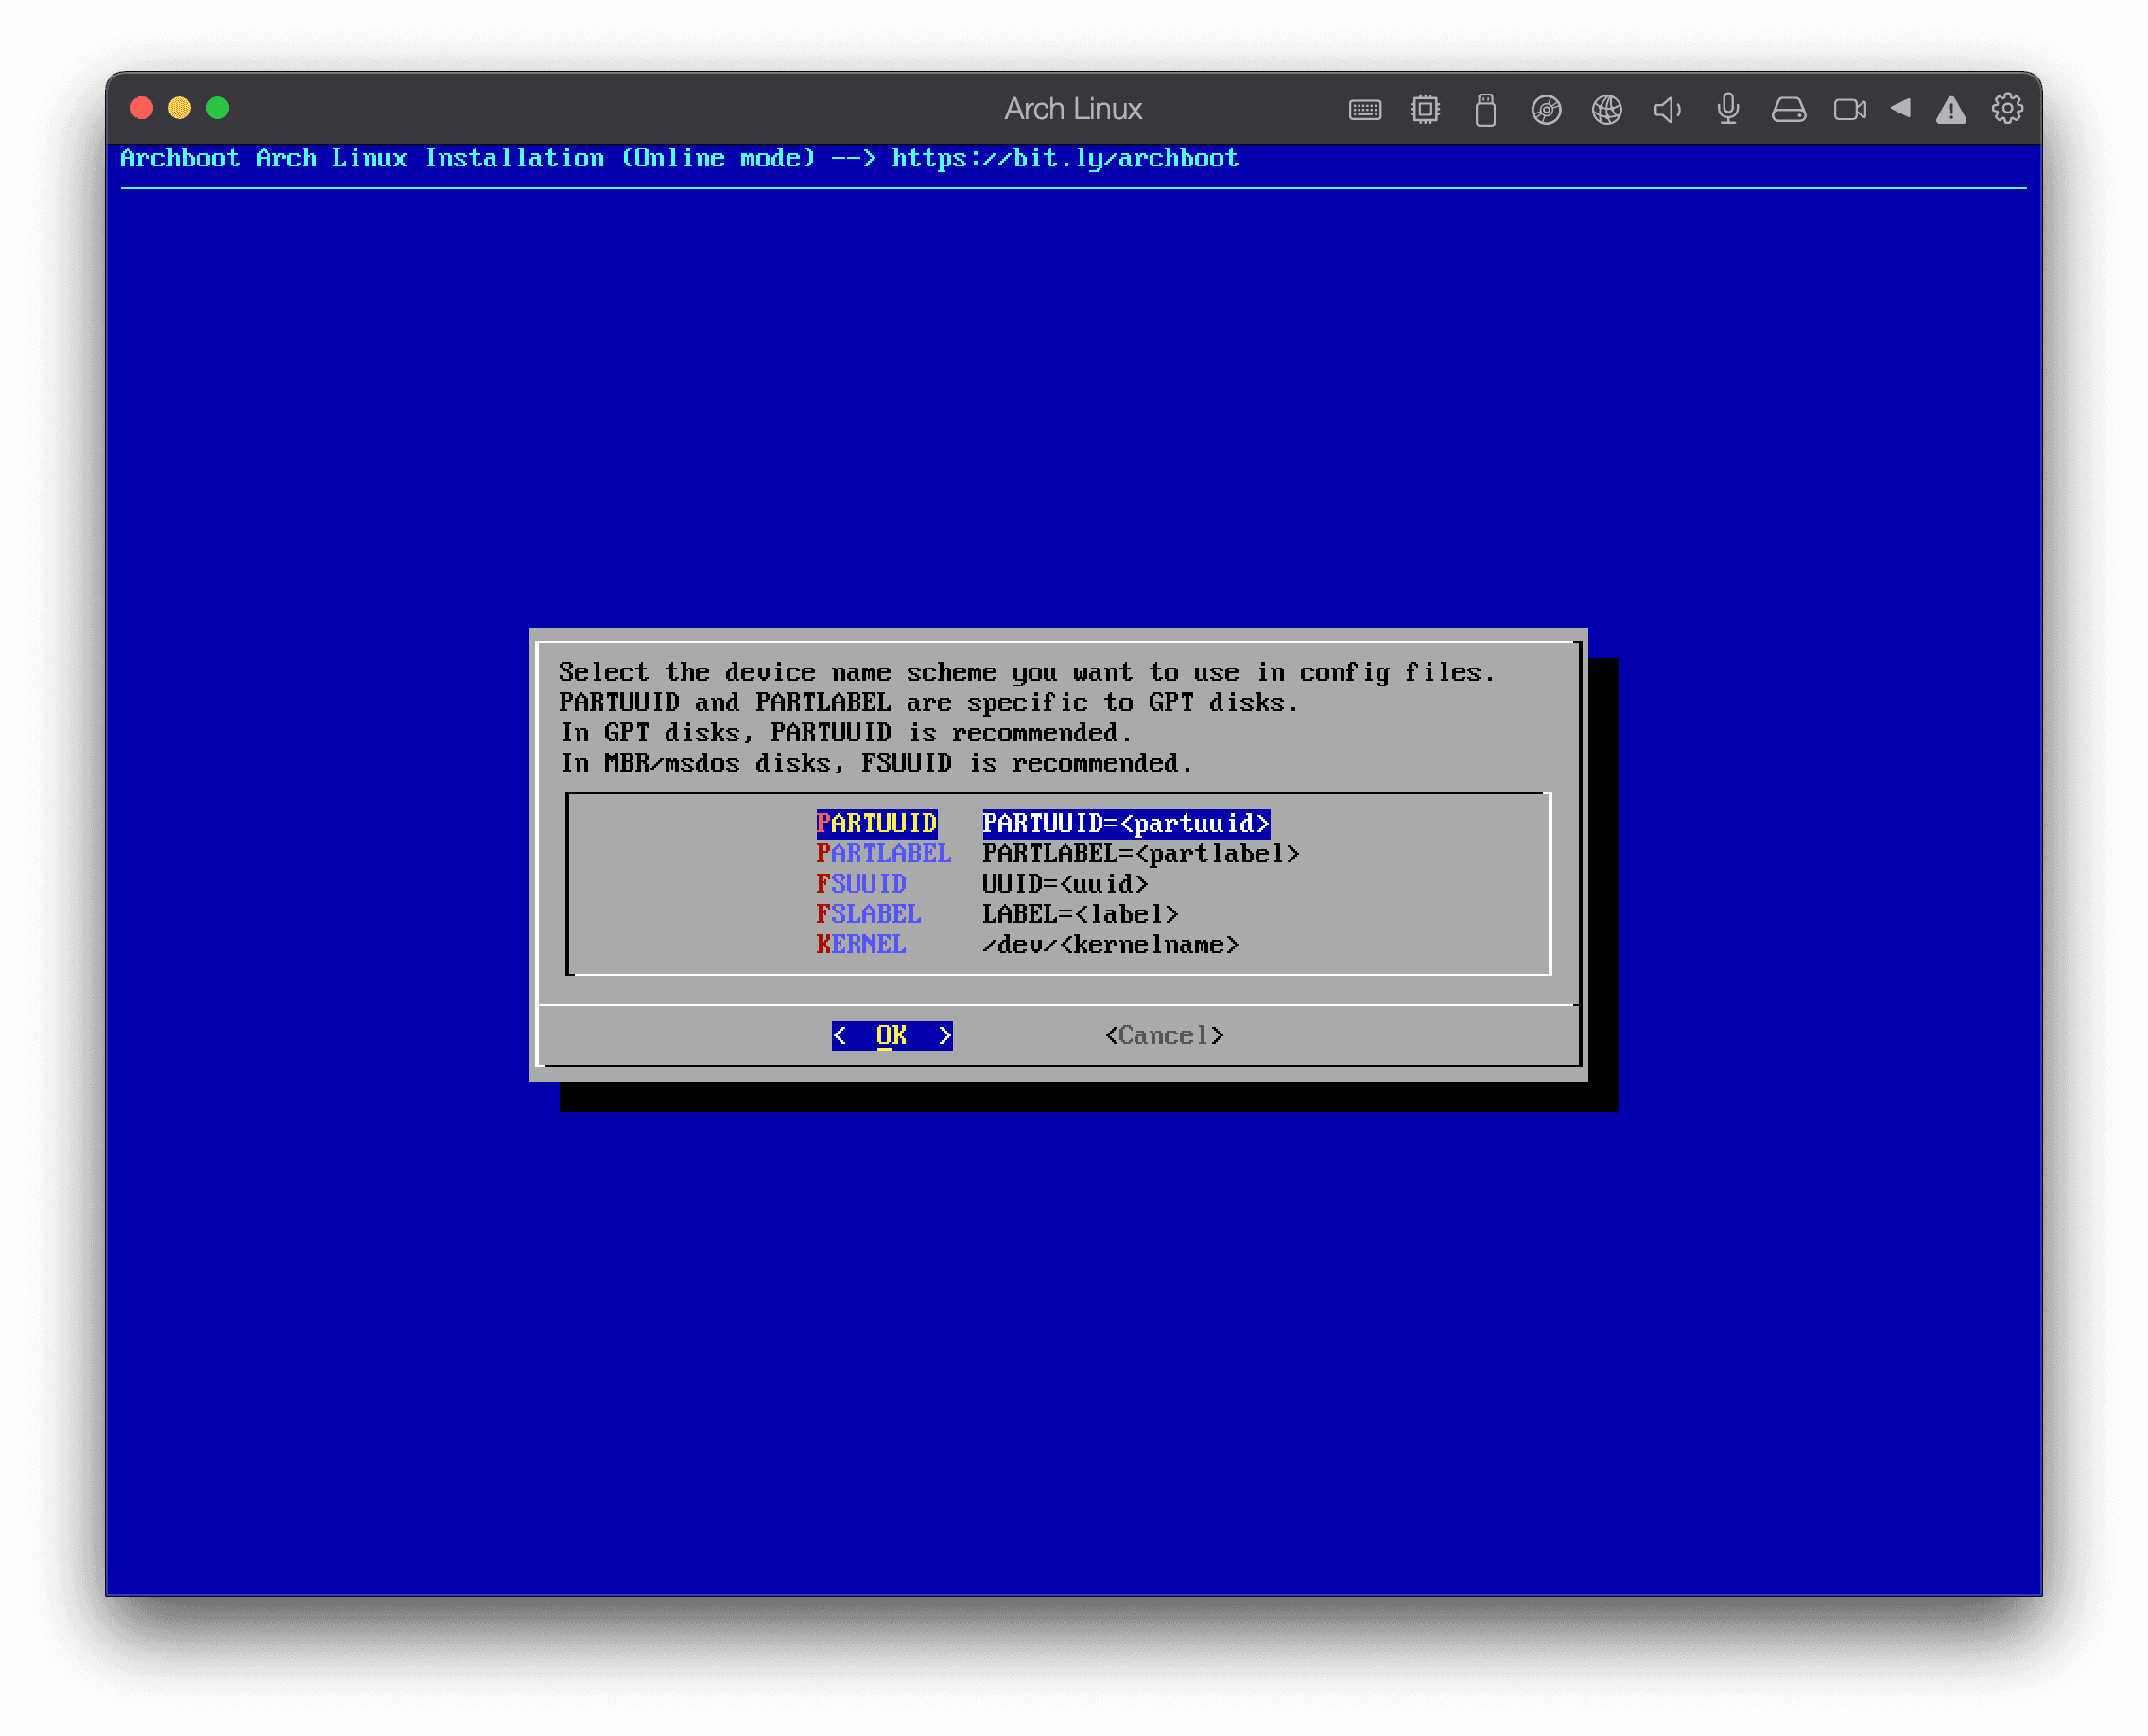 install-partition-4